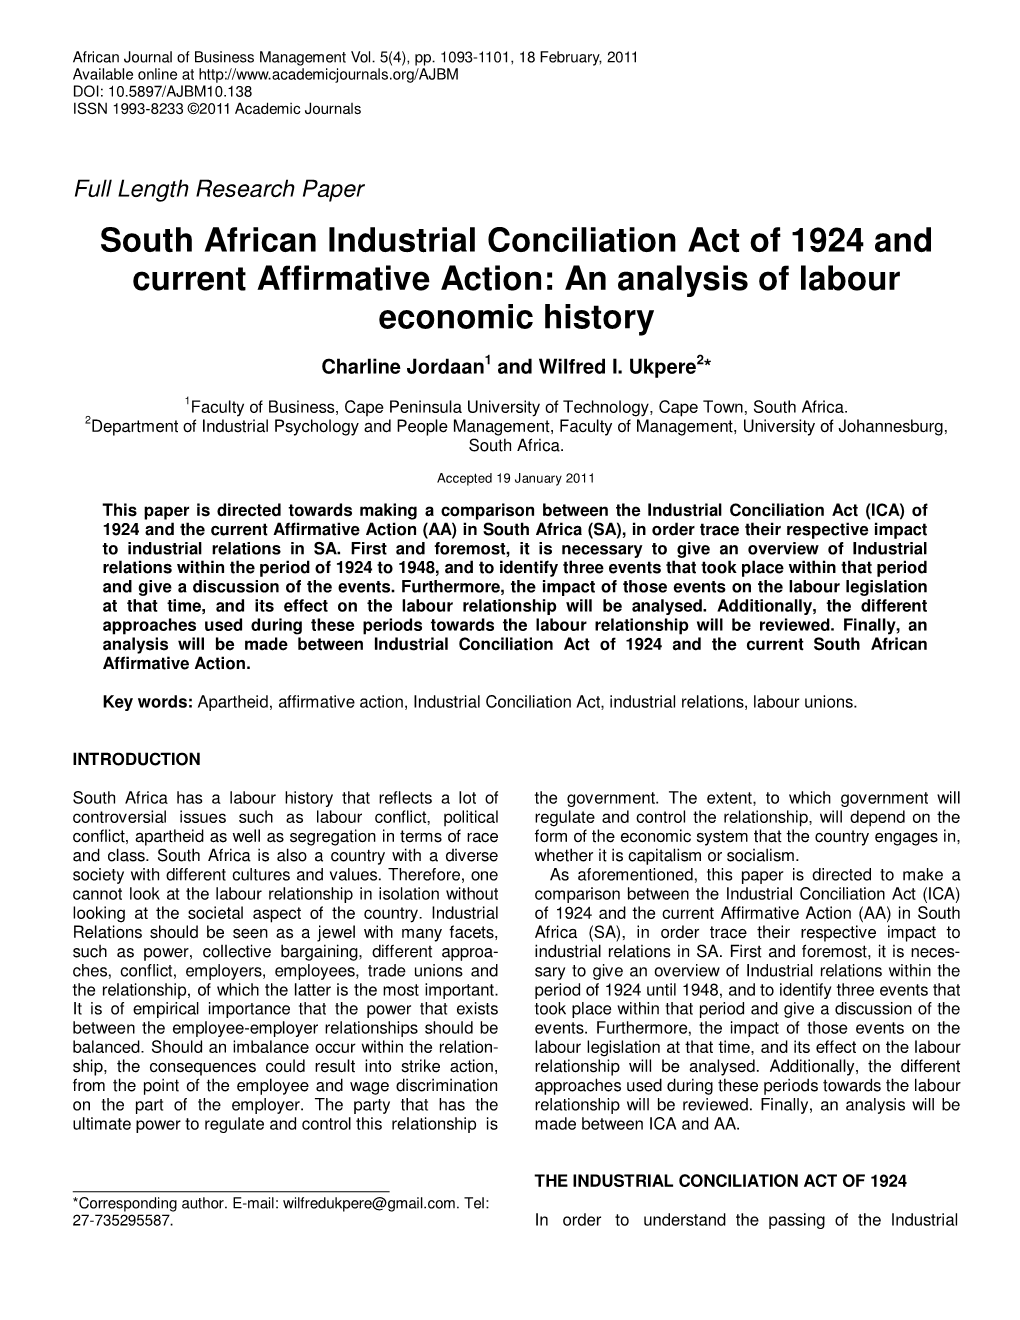 South African Industrial Conciliation Act of 1924 and Current Affirmative Action: an Analysis of Labour Economic History